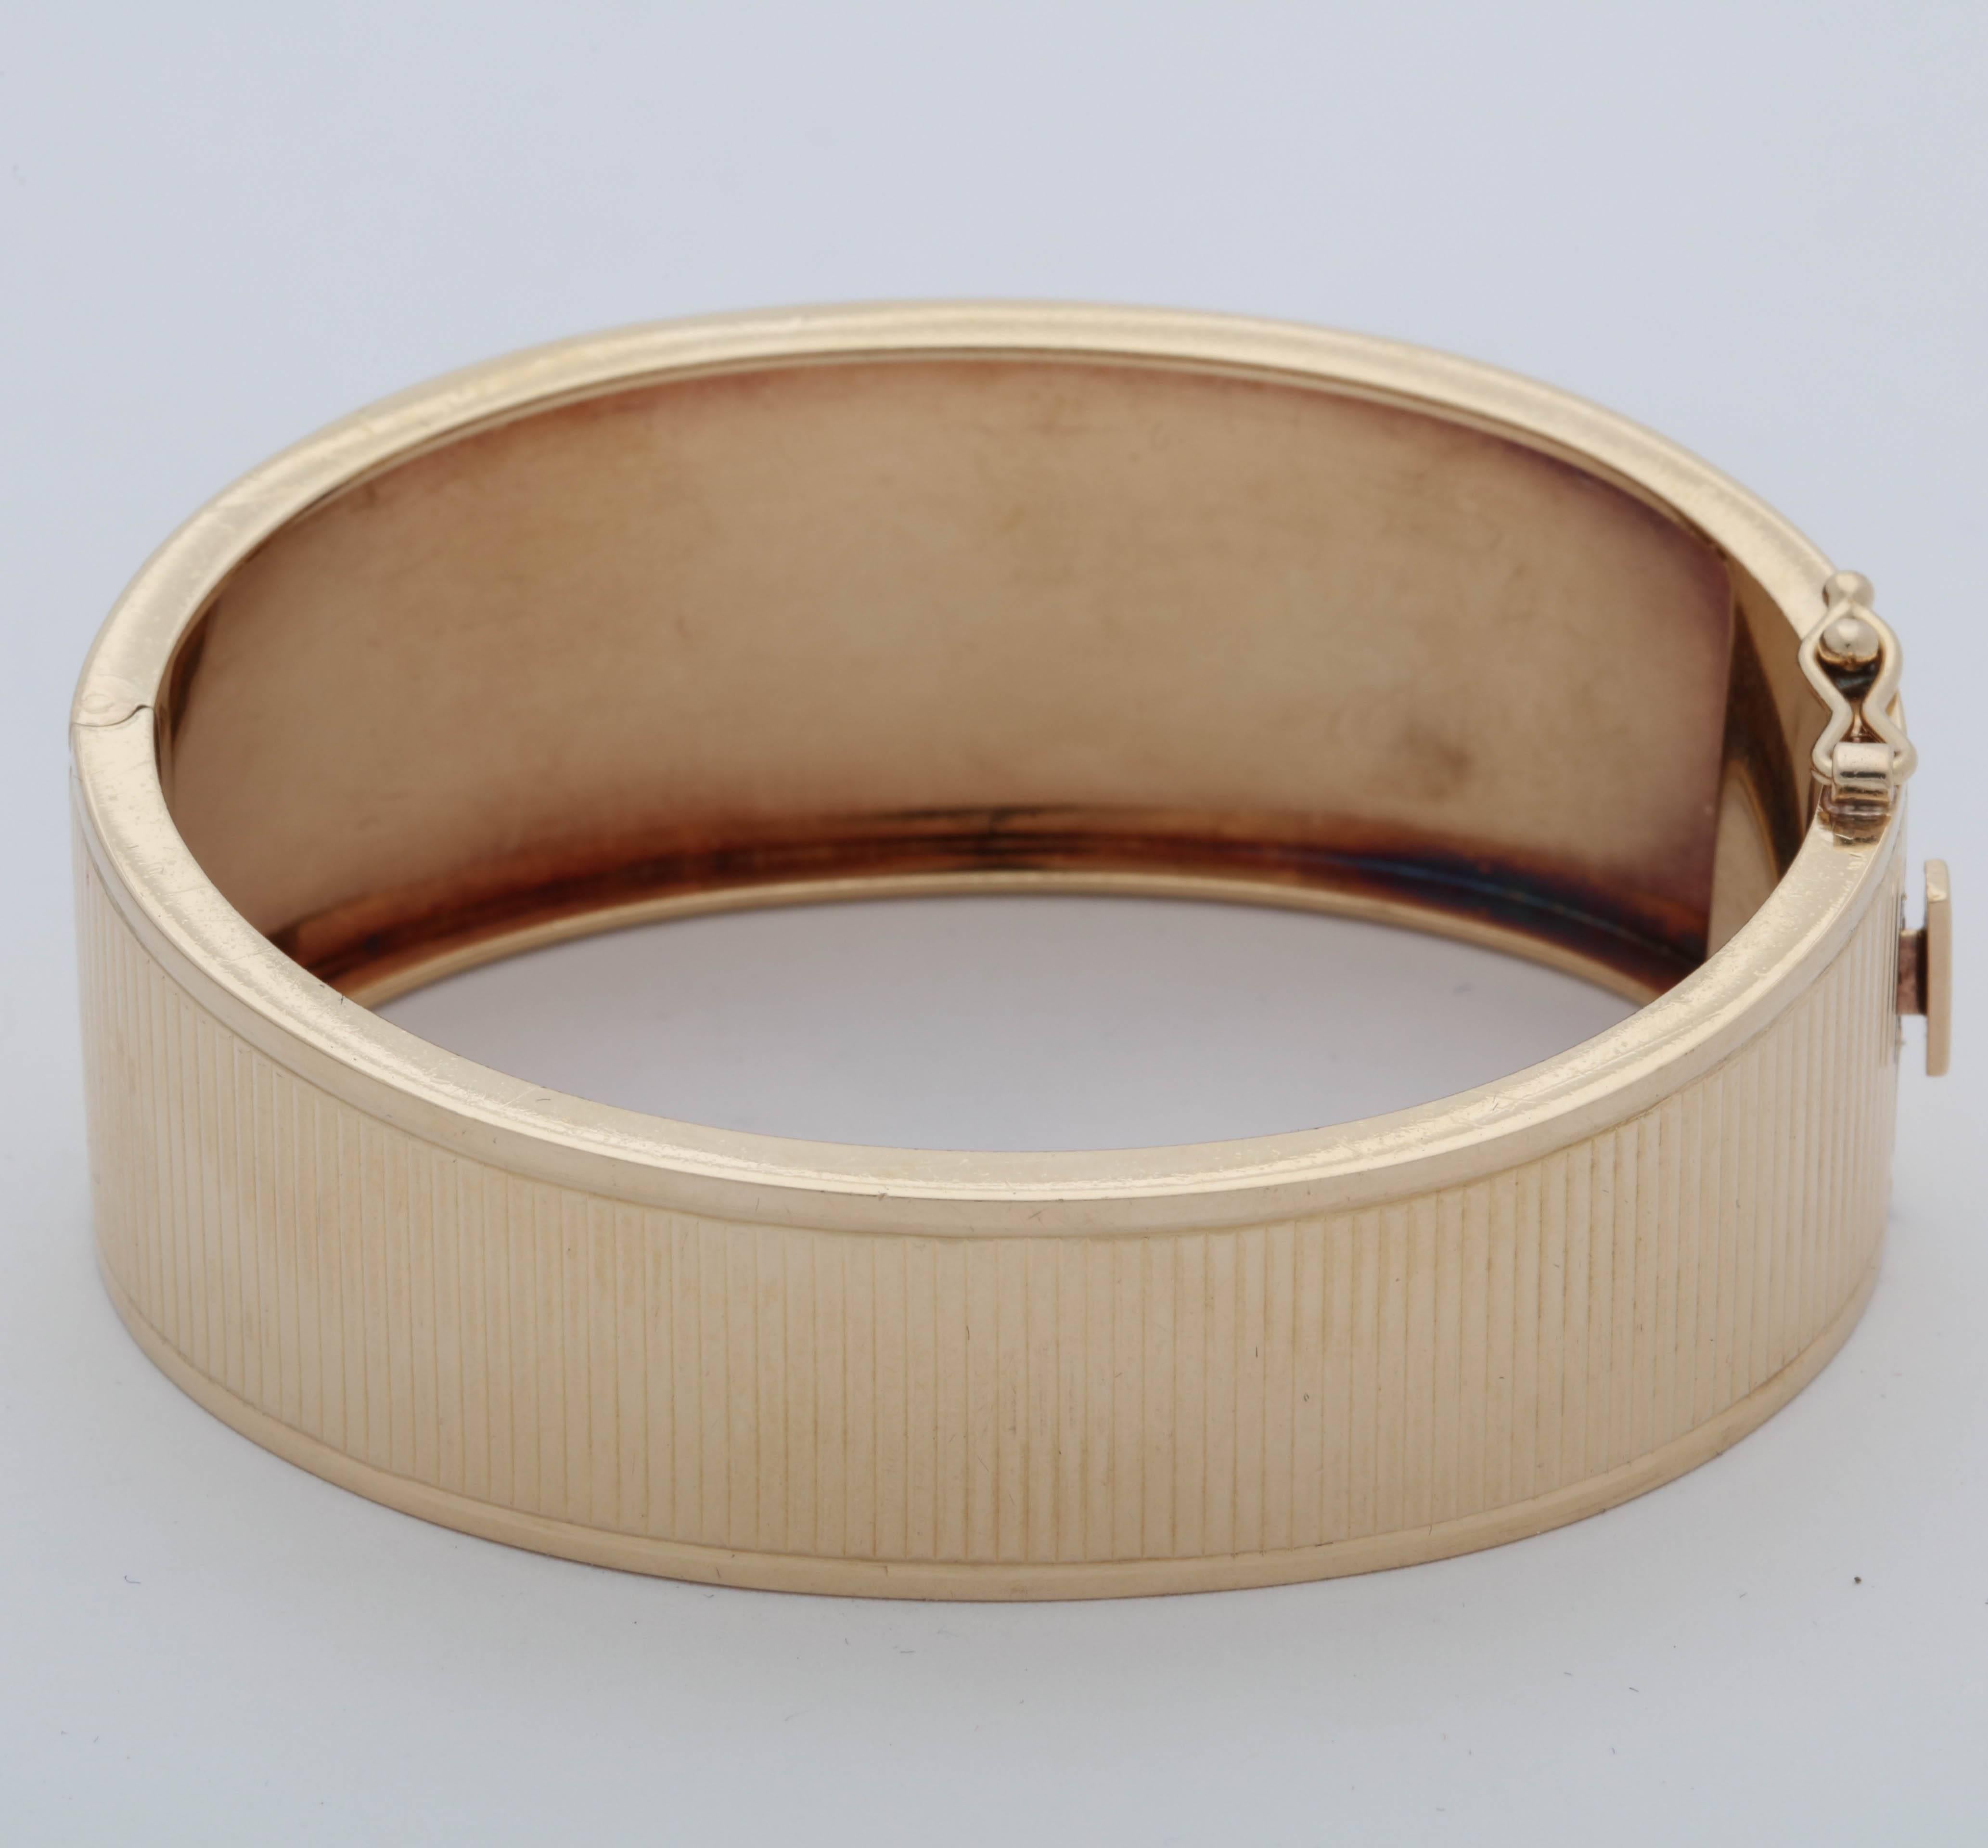 1940s Cool, Chic and Hip High Polish Ridged Gold Tapered Bangle Bracelet 1